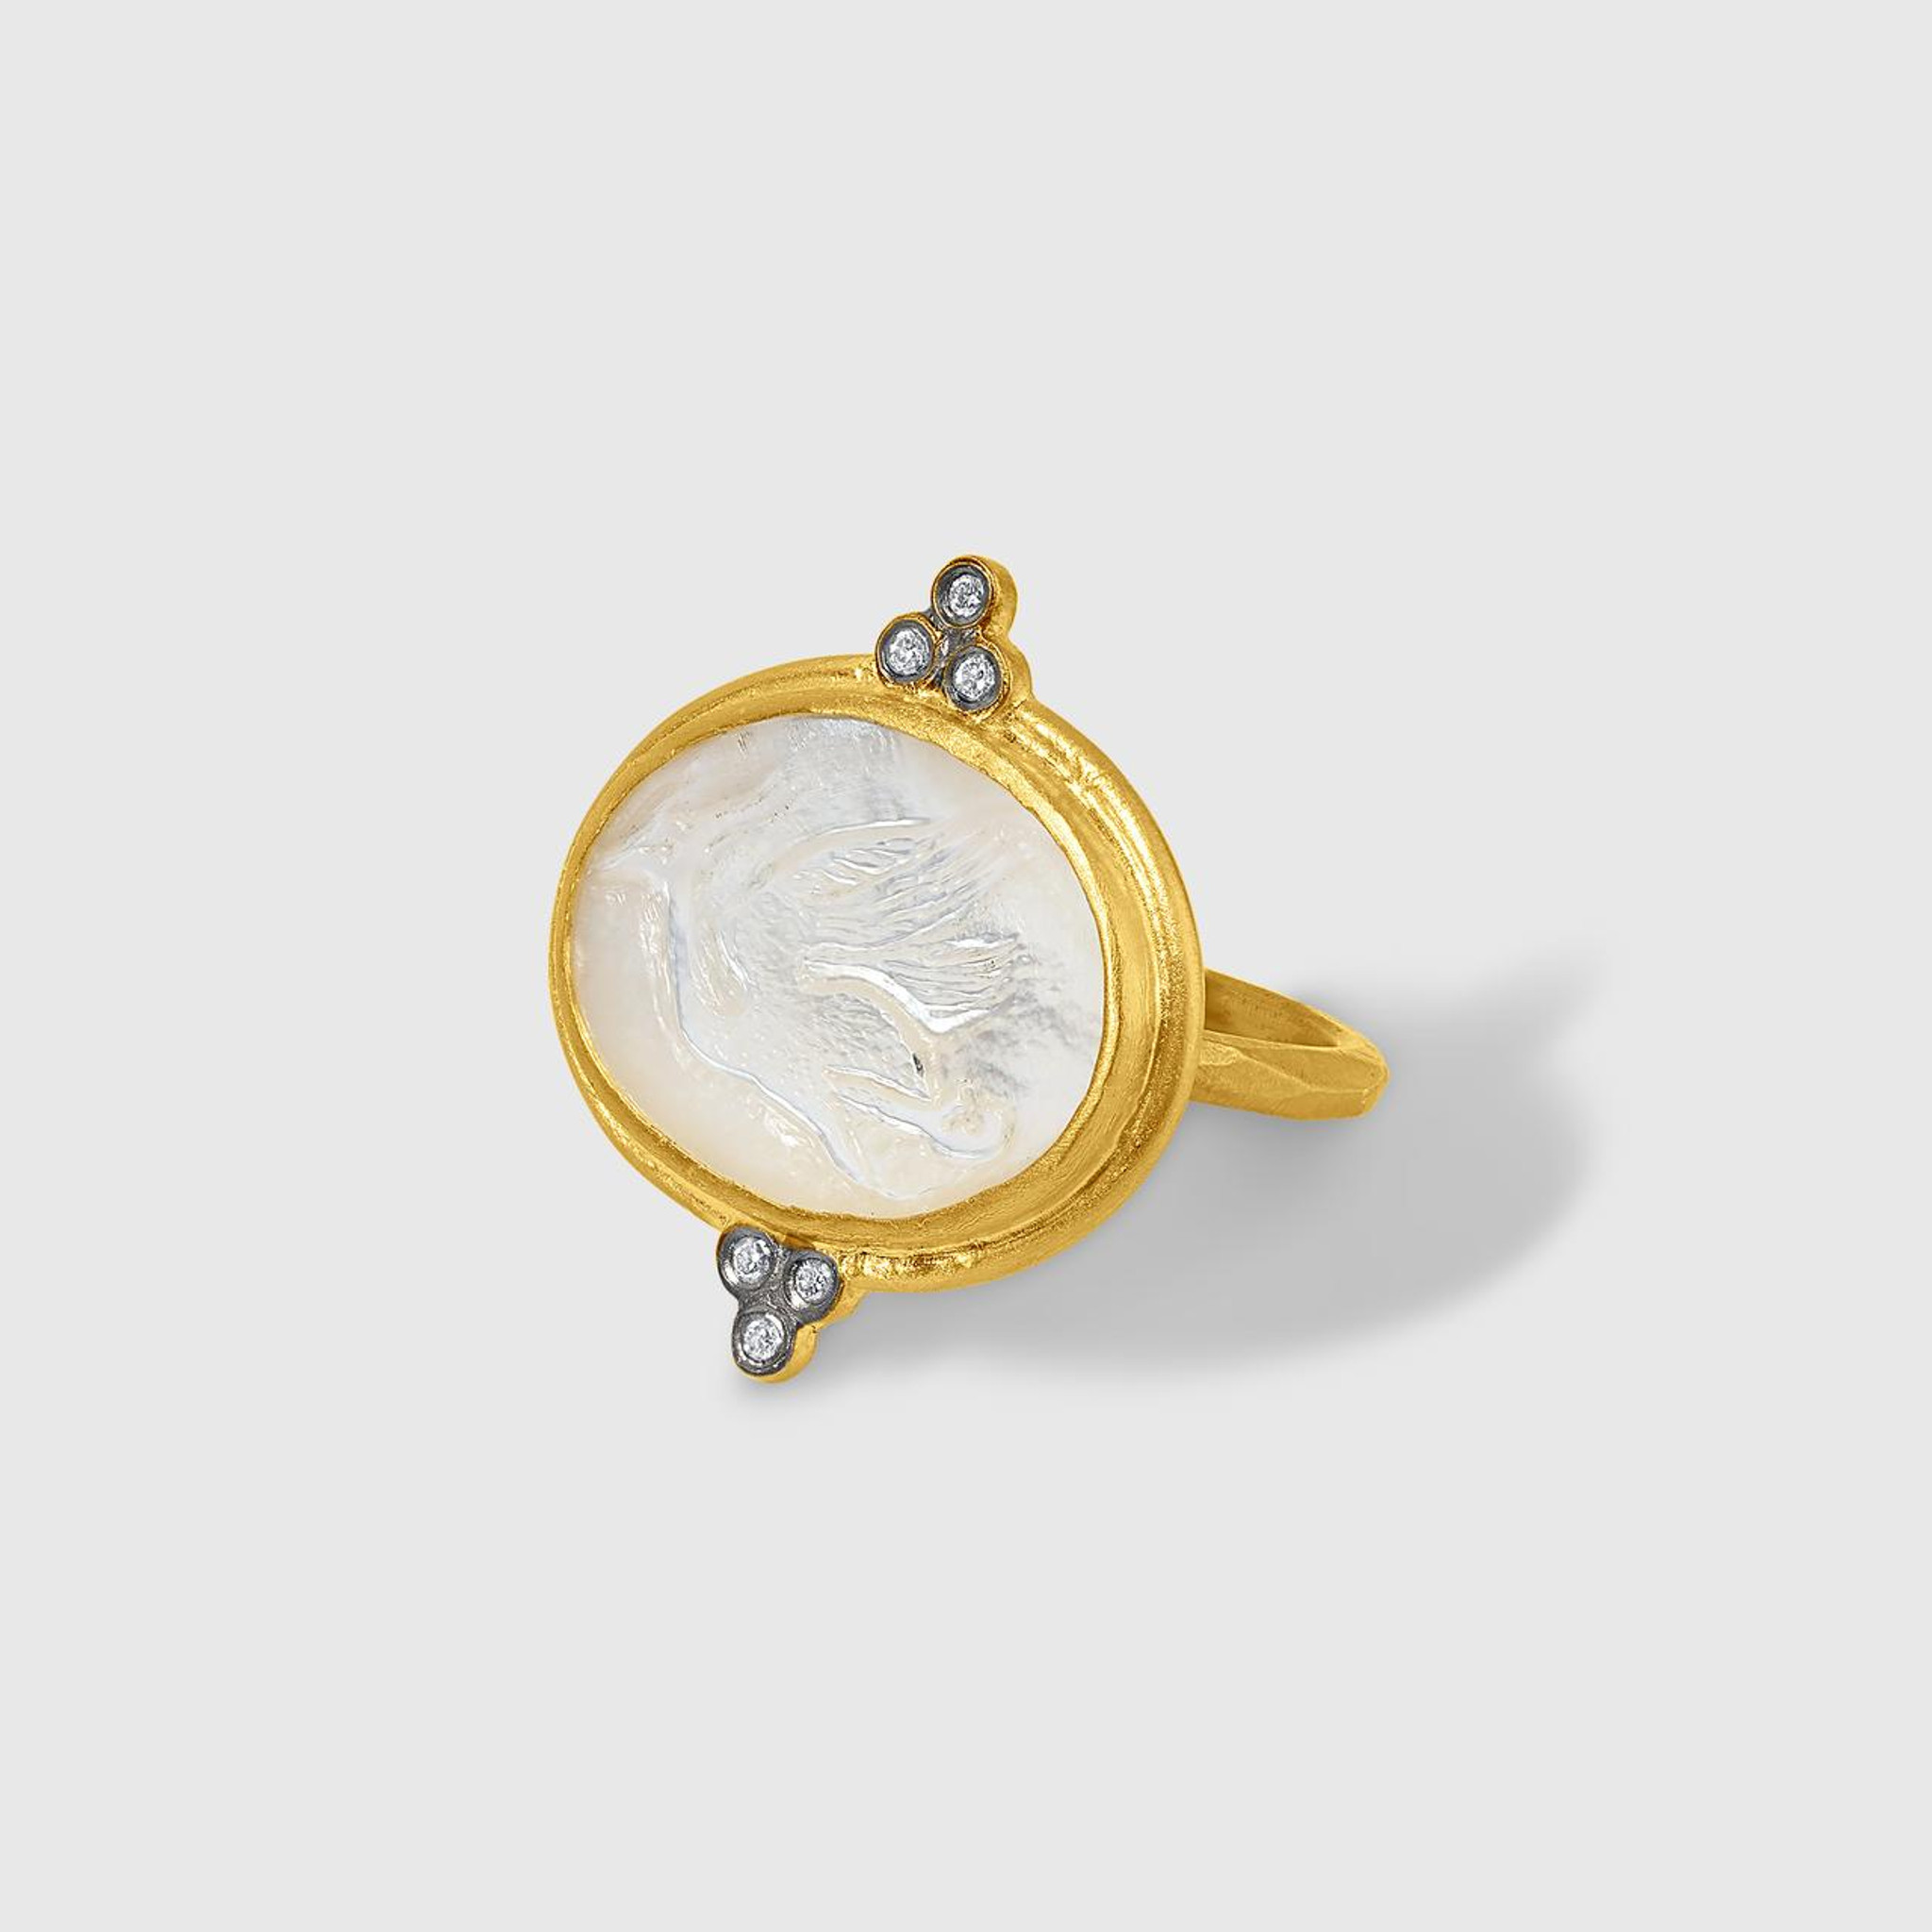 Mother of Pearl, Carved Crane Motif Statement Ring with Diamonds, 24kt Yellow Gold and Sterling Silver by Kurtulan of Istanbul, Turkey